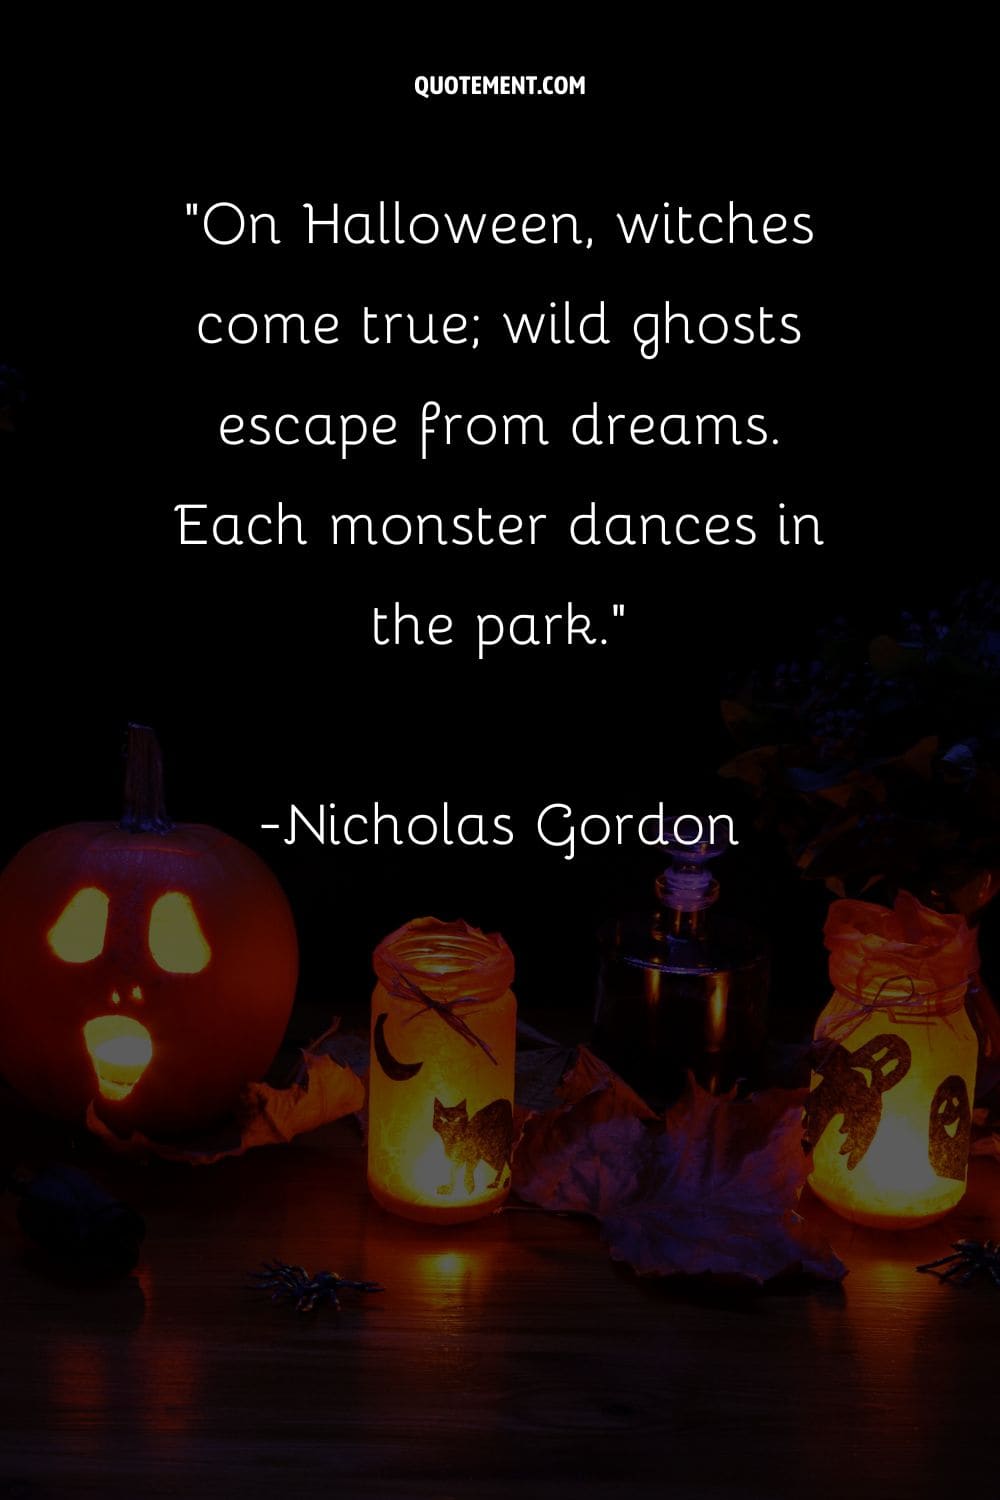 On Halloween, witches come true; wild ghosts escape from dreams. Each monster dances in the park